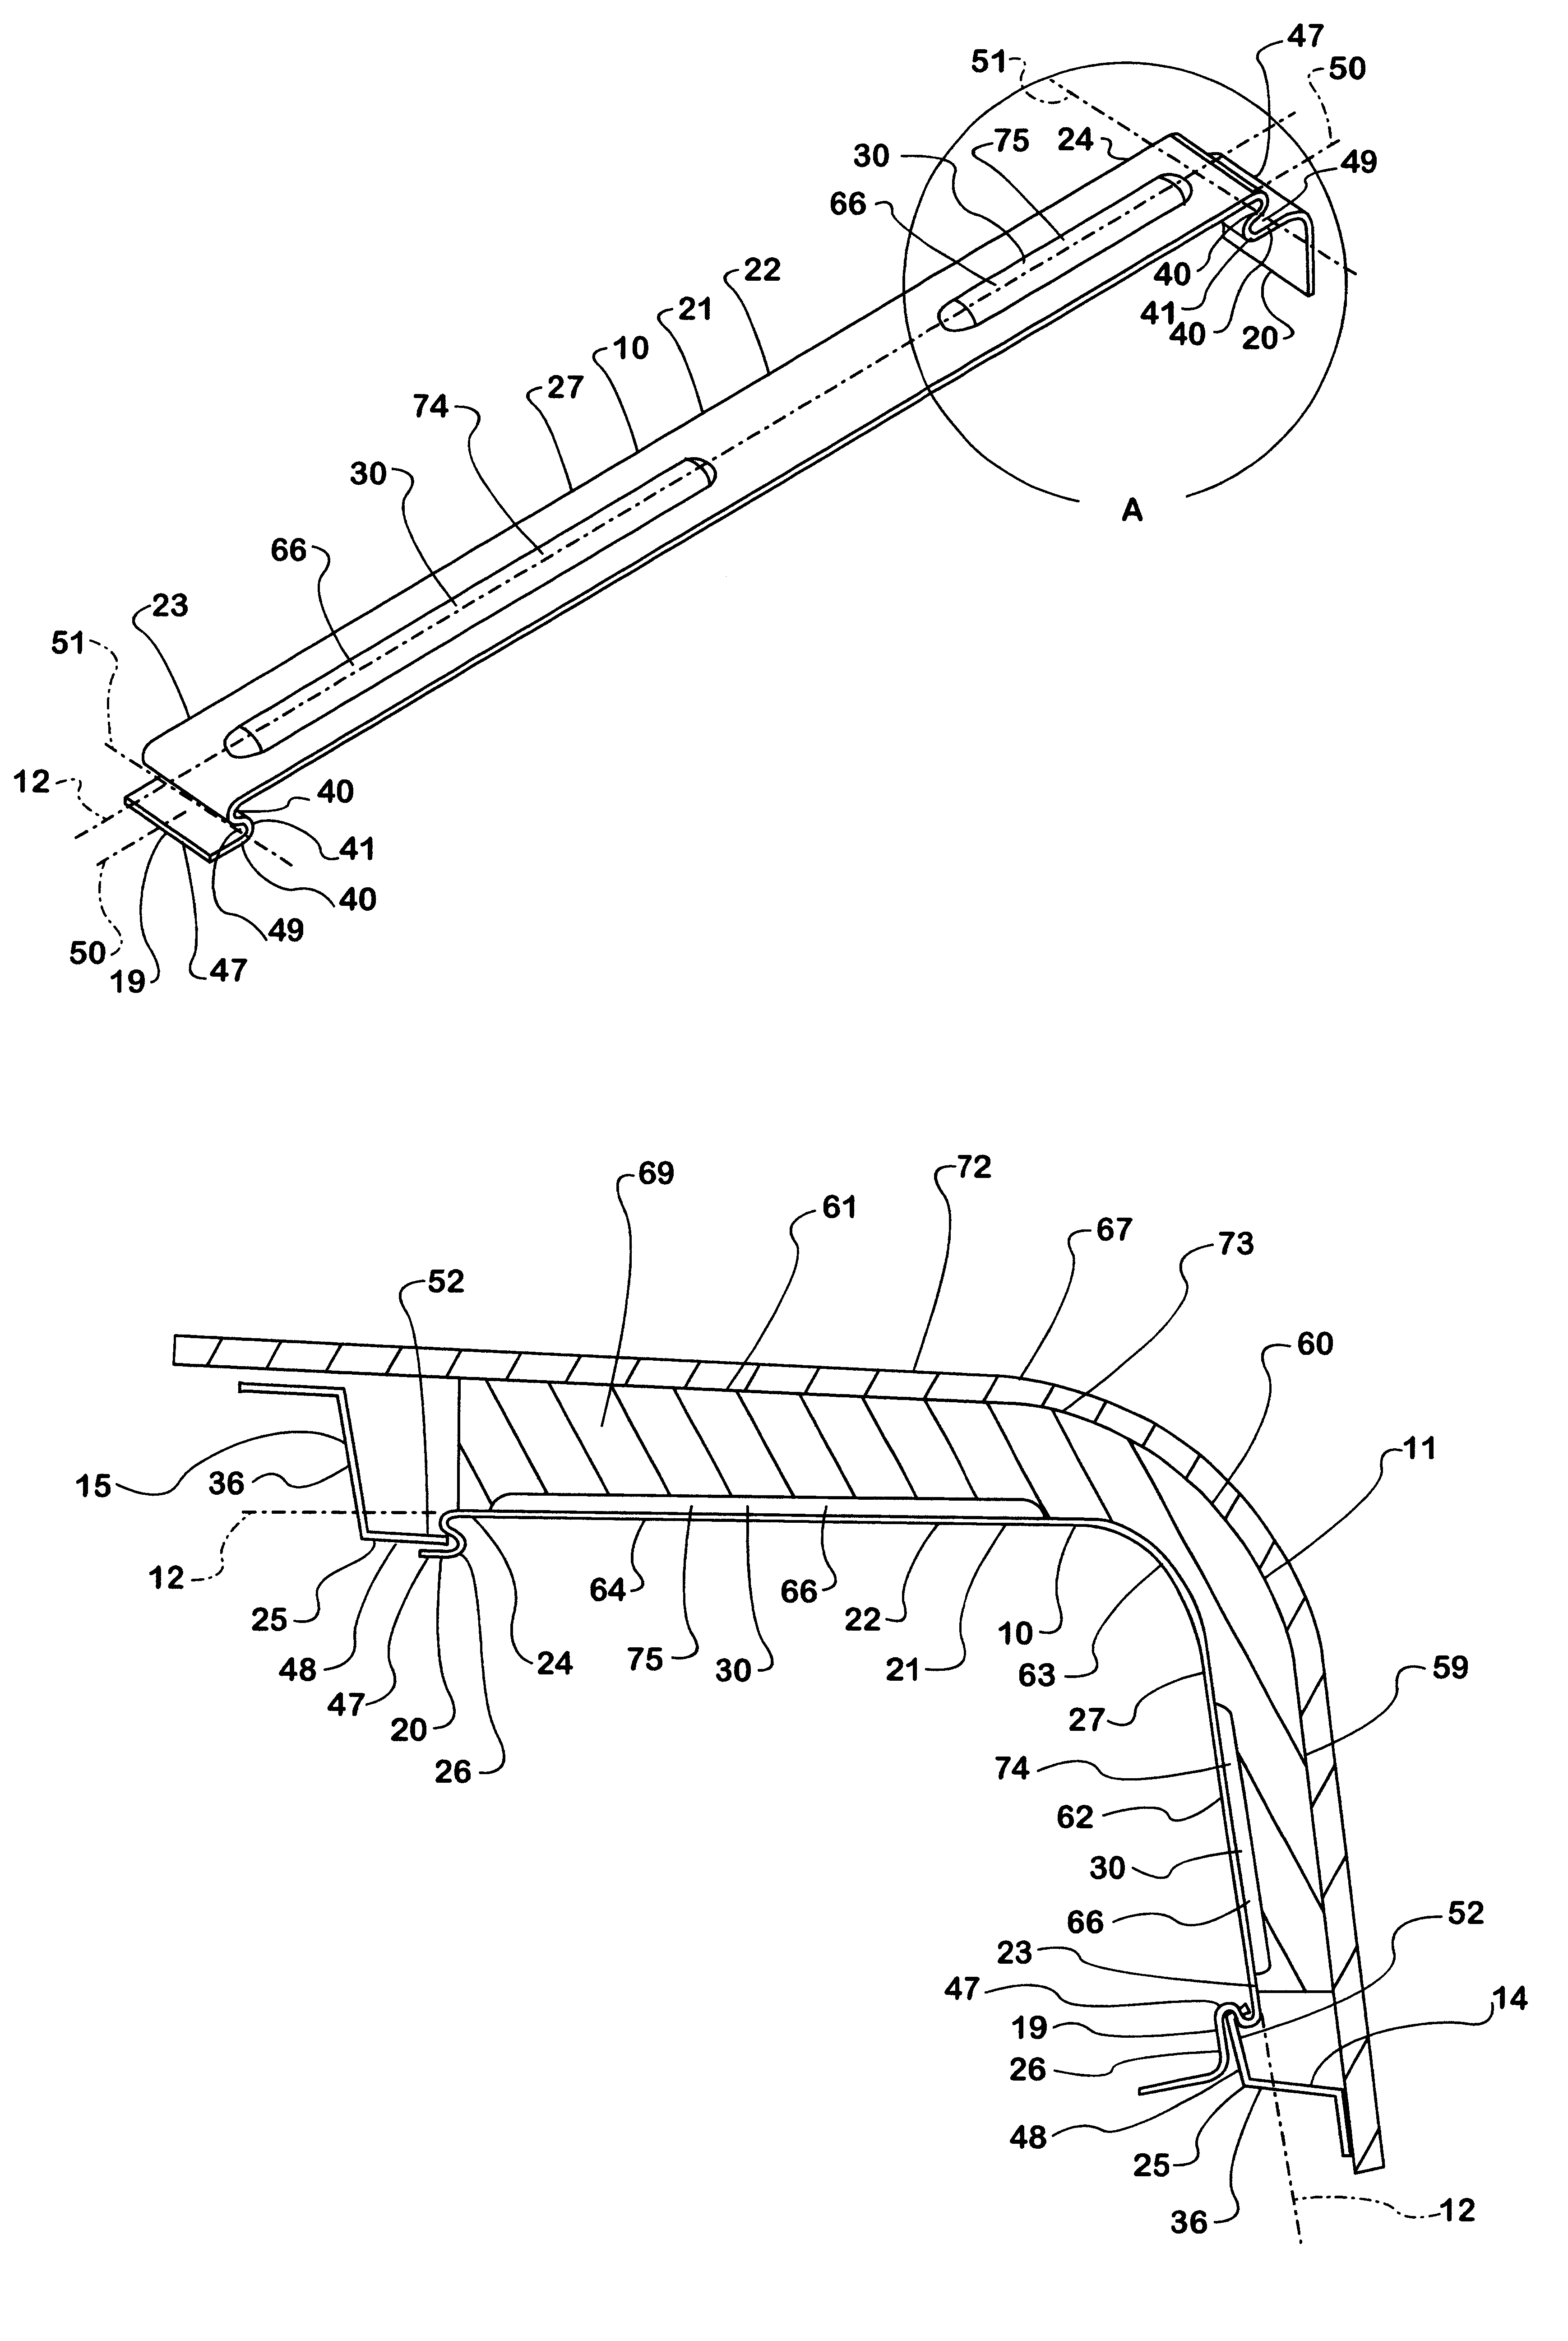 Device and method to hold sound insulation in vehicle hood